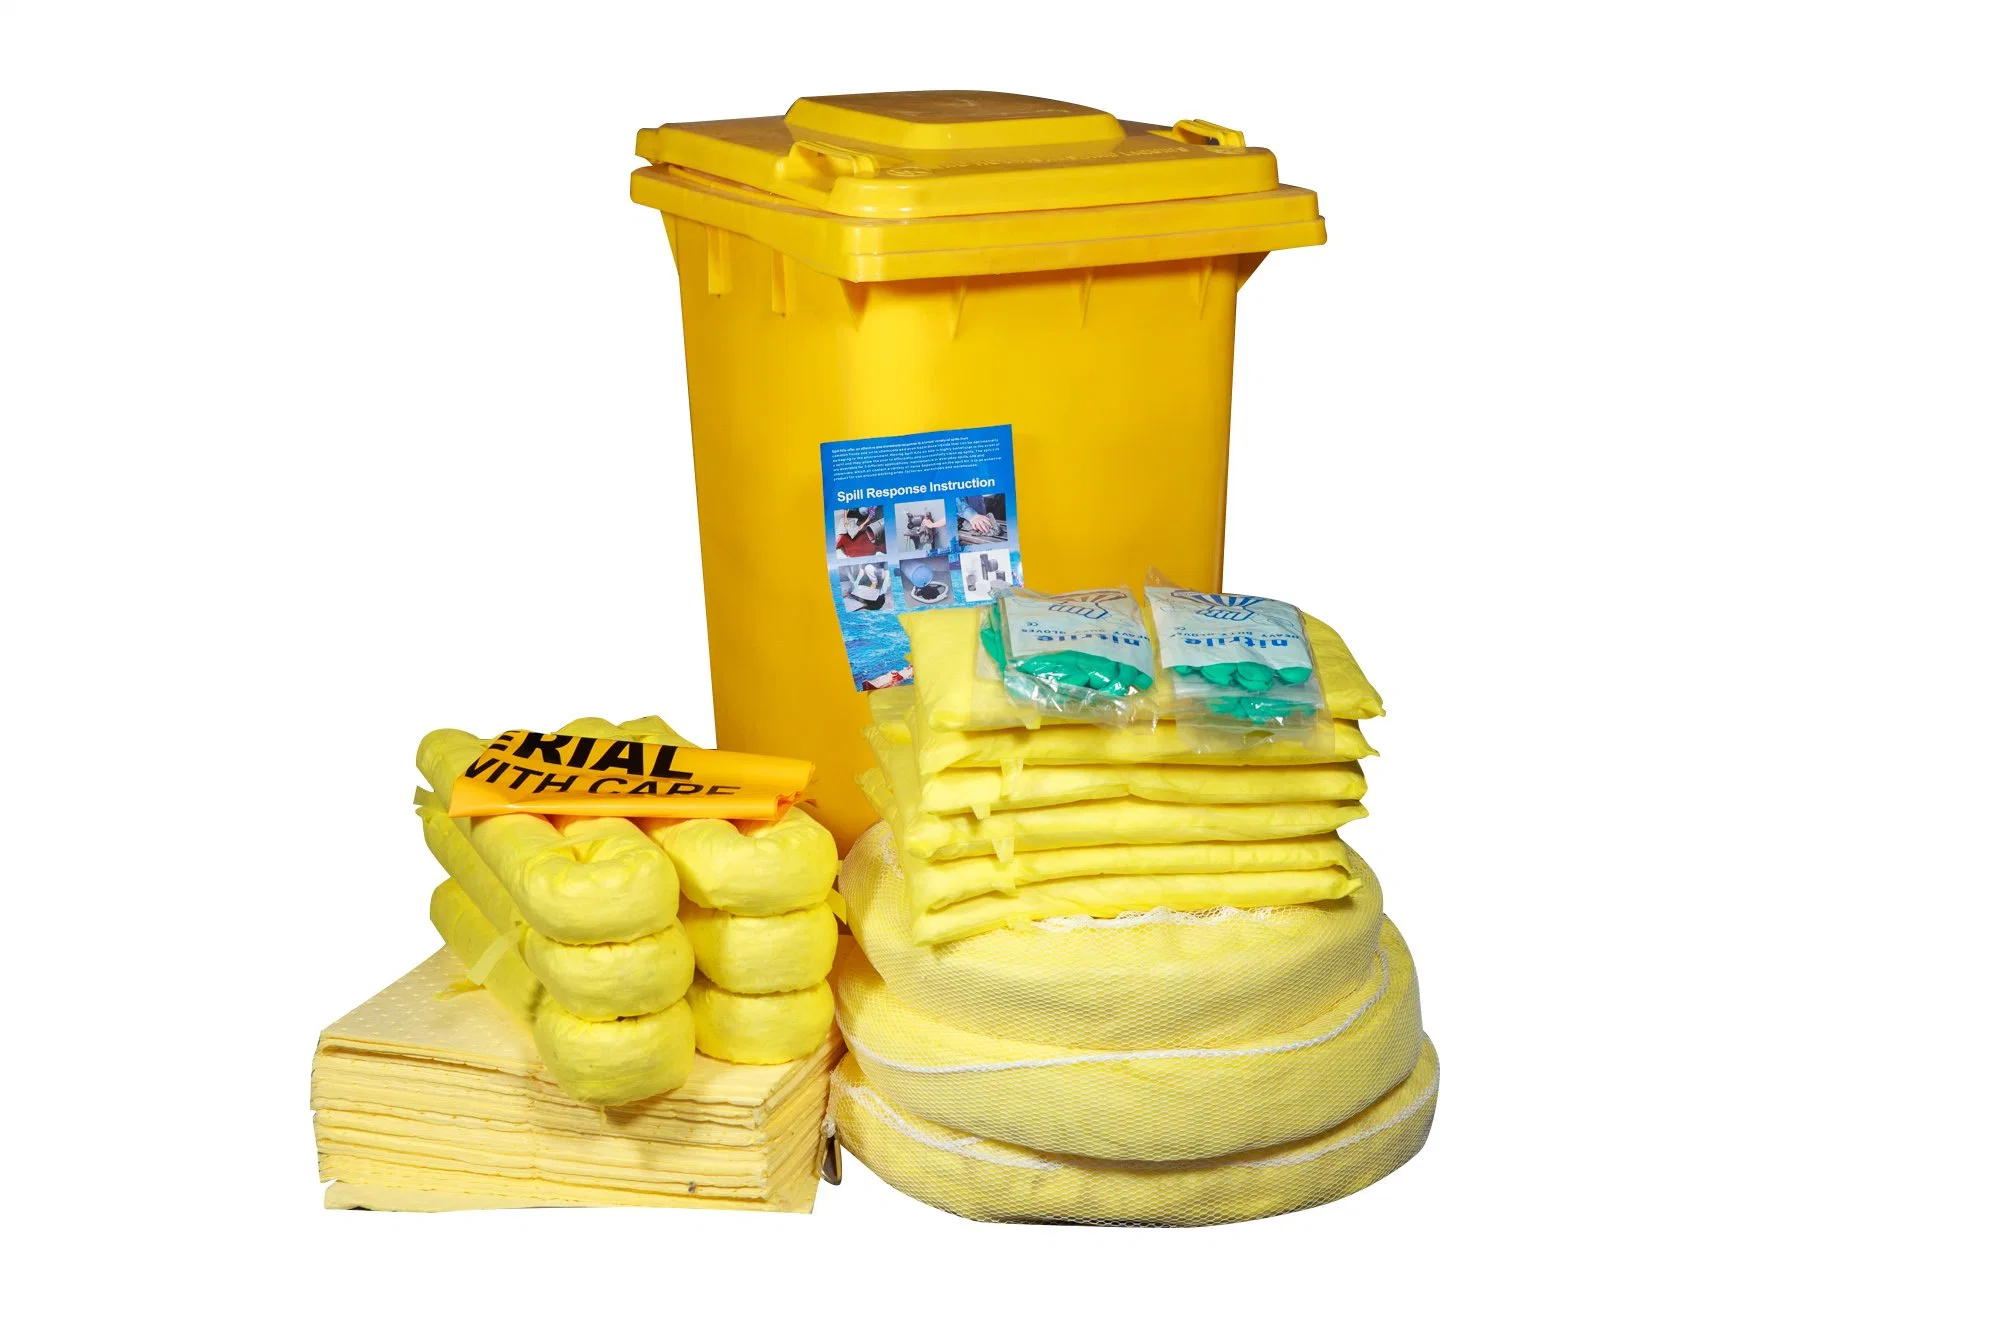 Emergency Spill Management 120L Chemical Absorbent Spill Kits